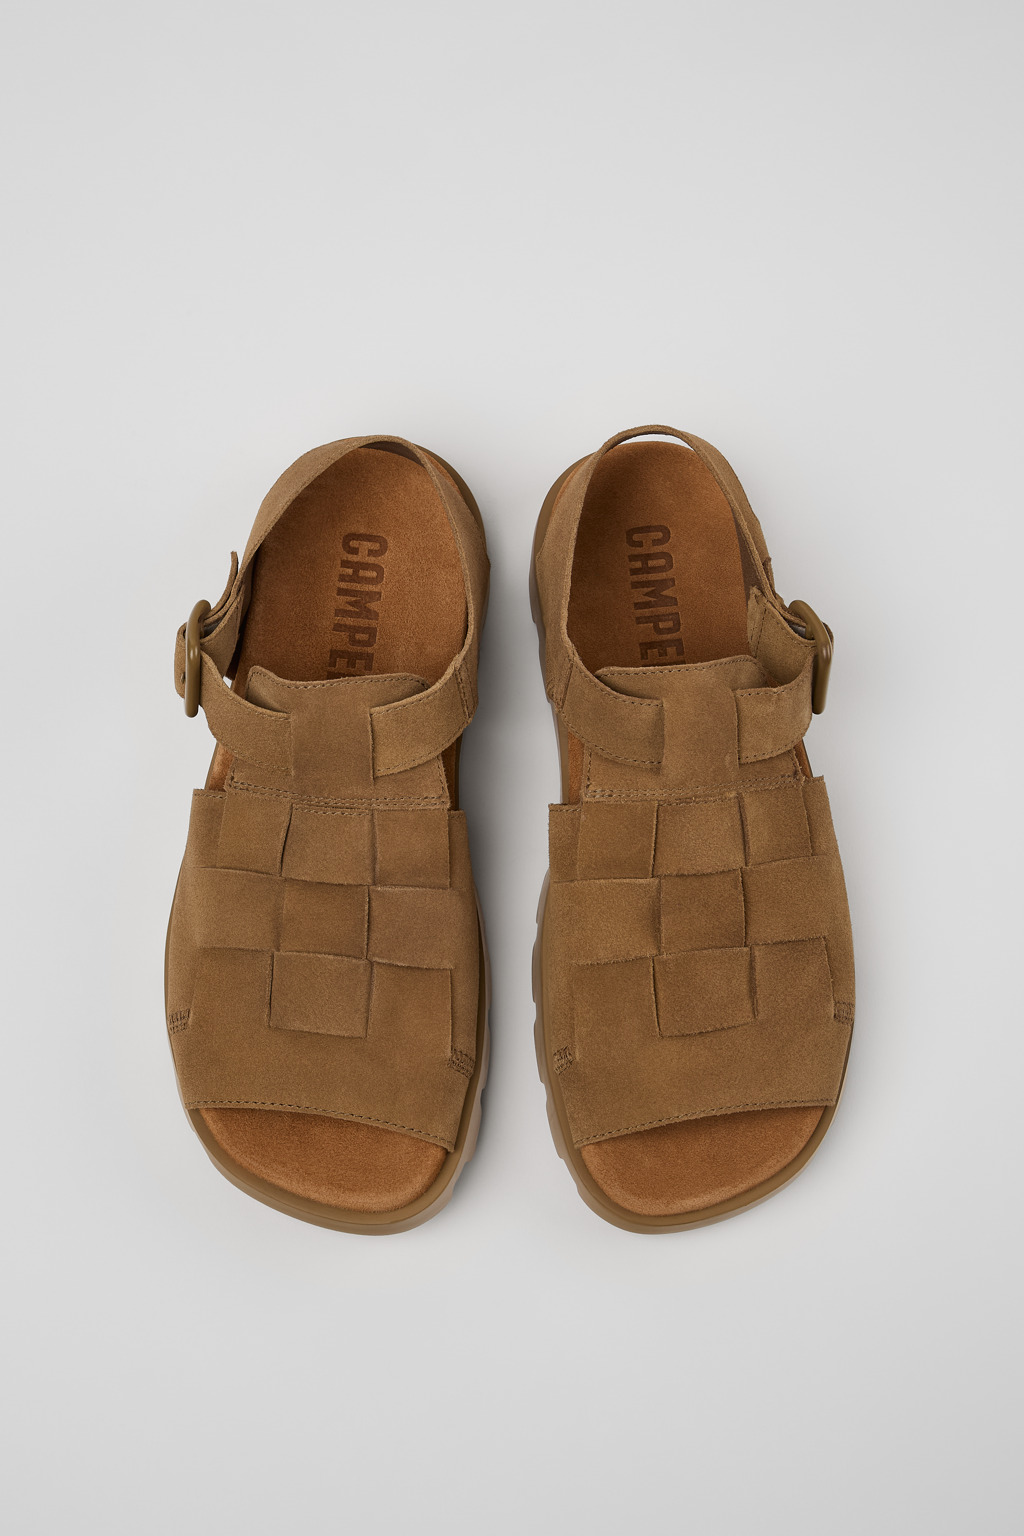 Brutus Brown Sandals for Men - Fall/Winter collection - Camper USA